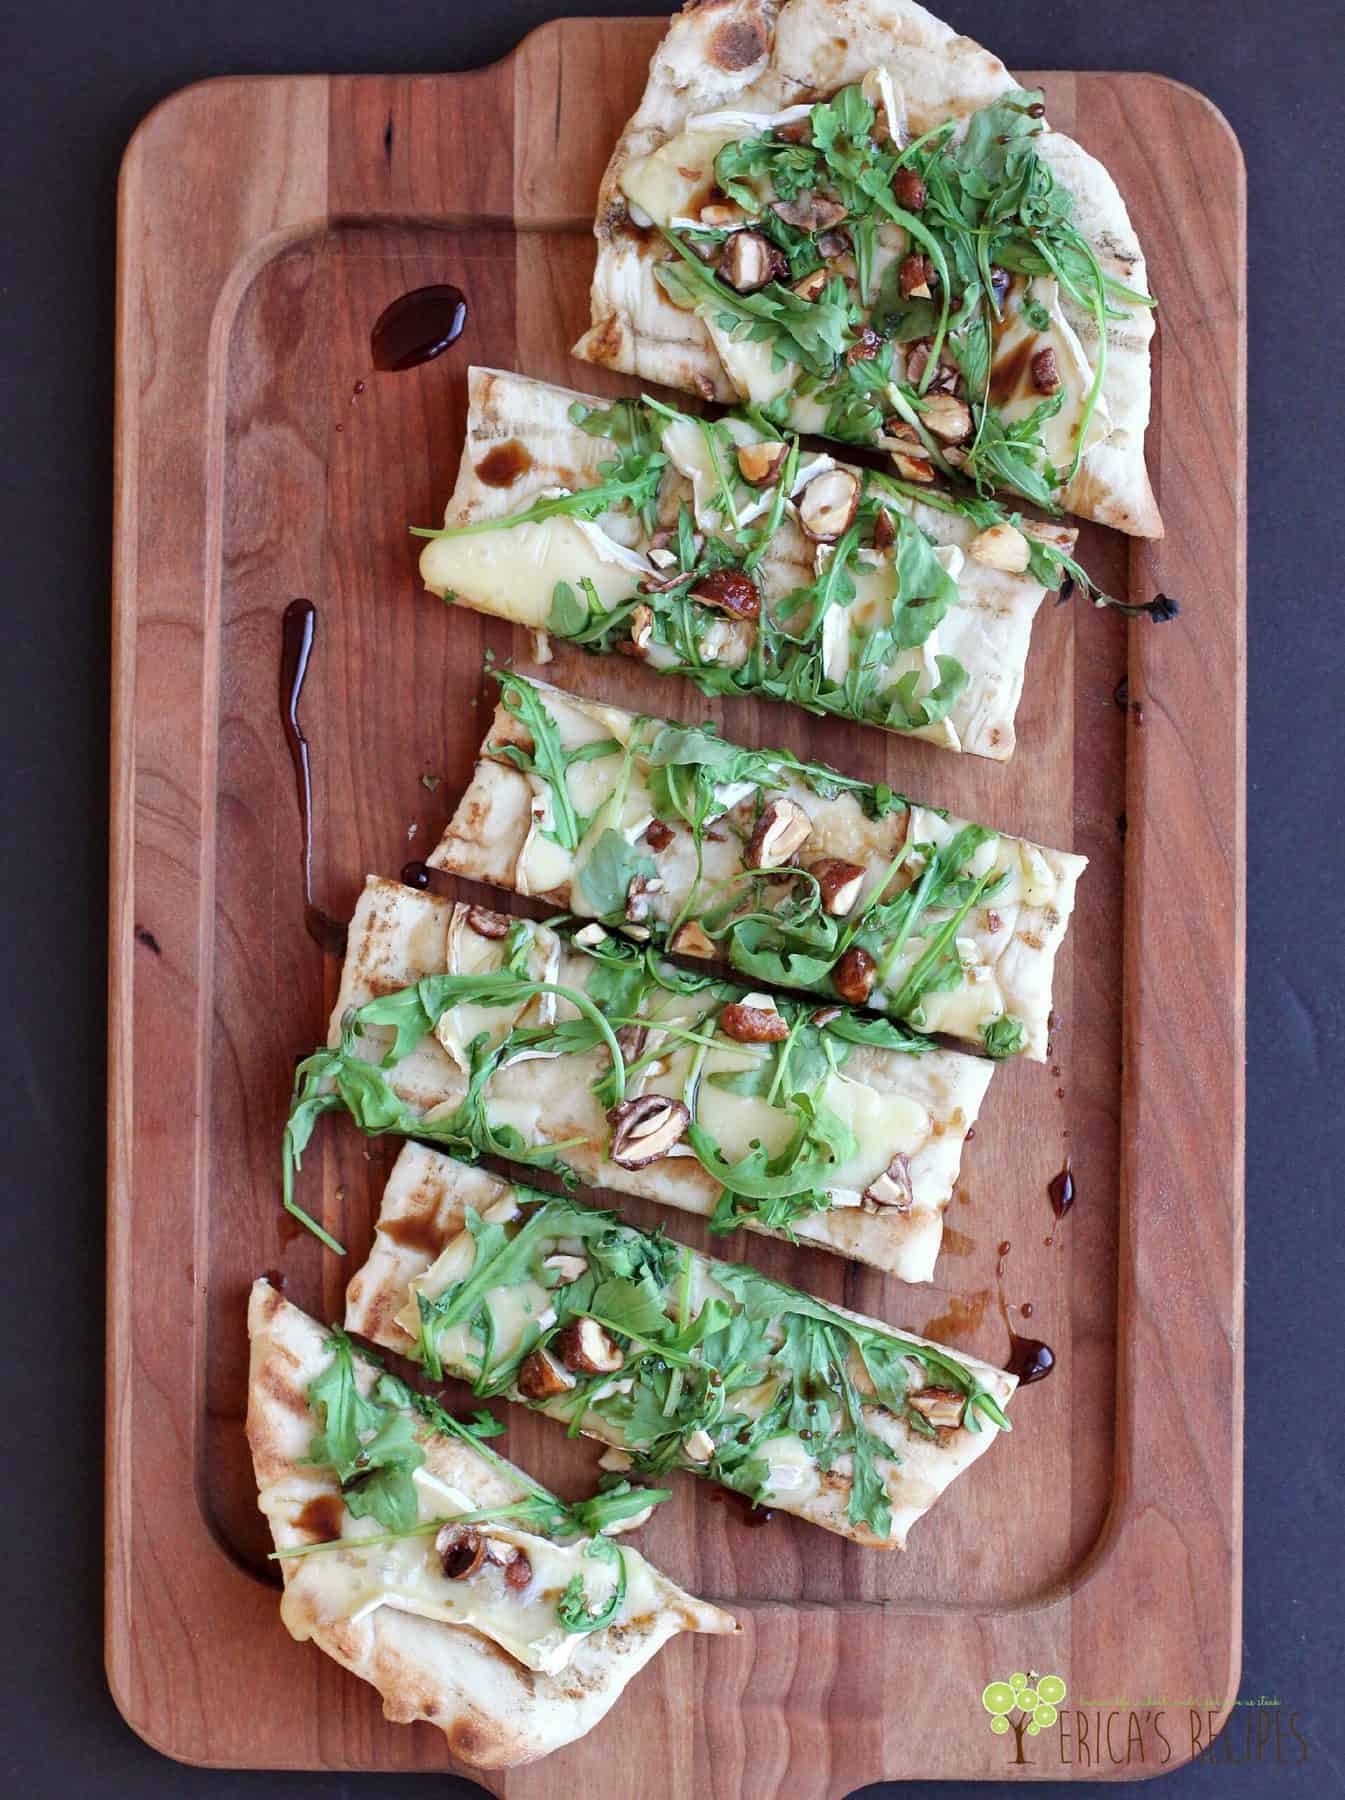 Grilled Flatbread with Brie, Arugula, Candied Nuts, and Balsamic-Honey Drizzle